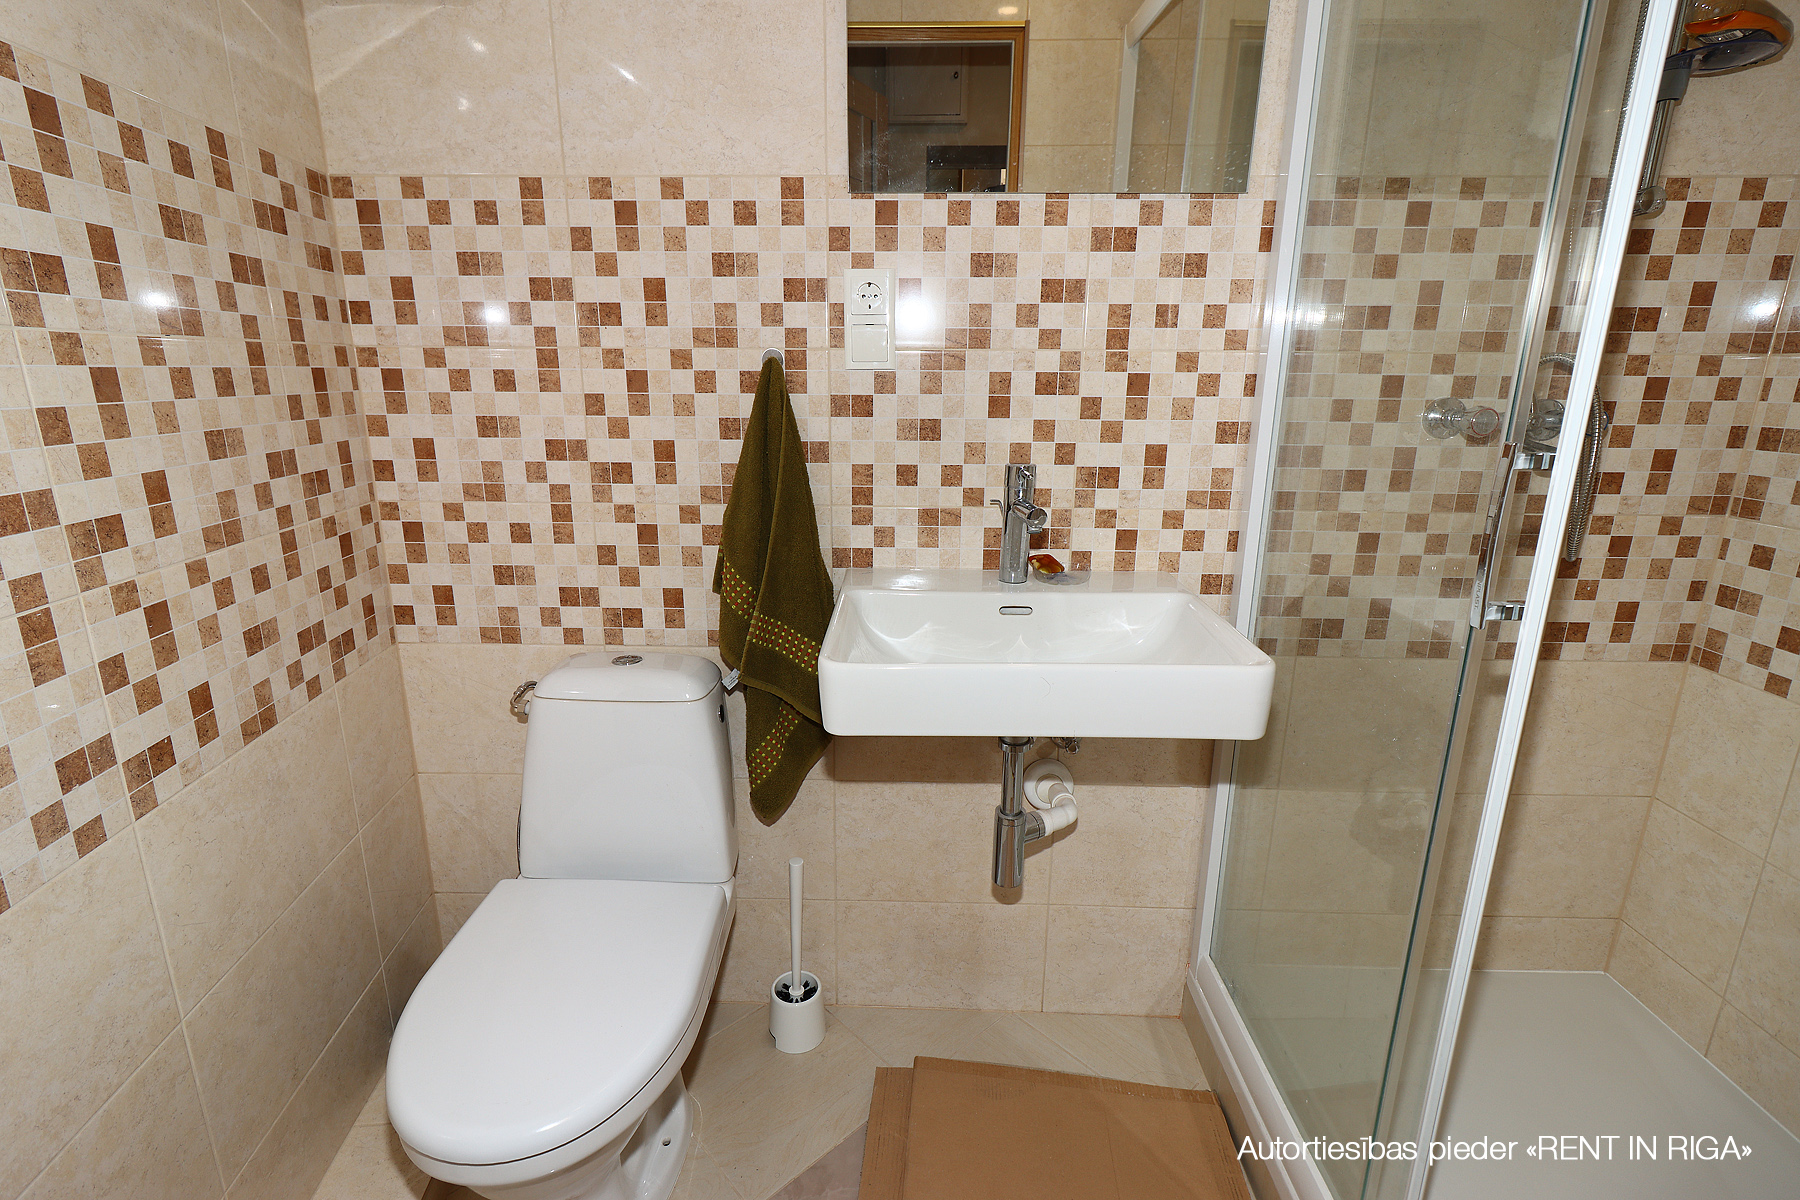 Investment property, Valmieras street - Image 1